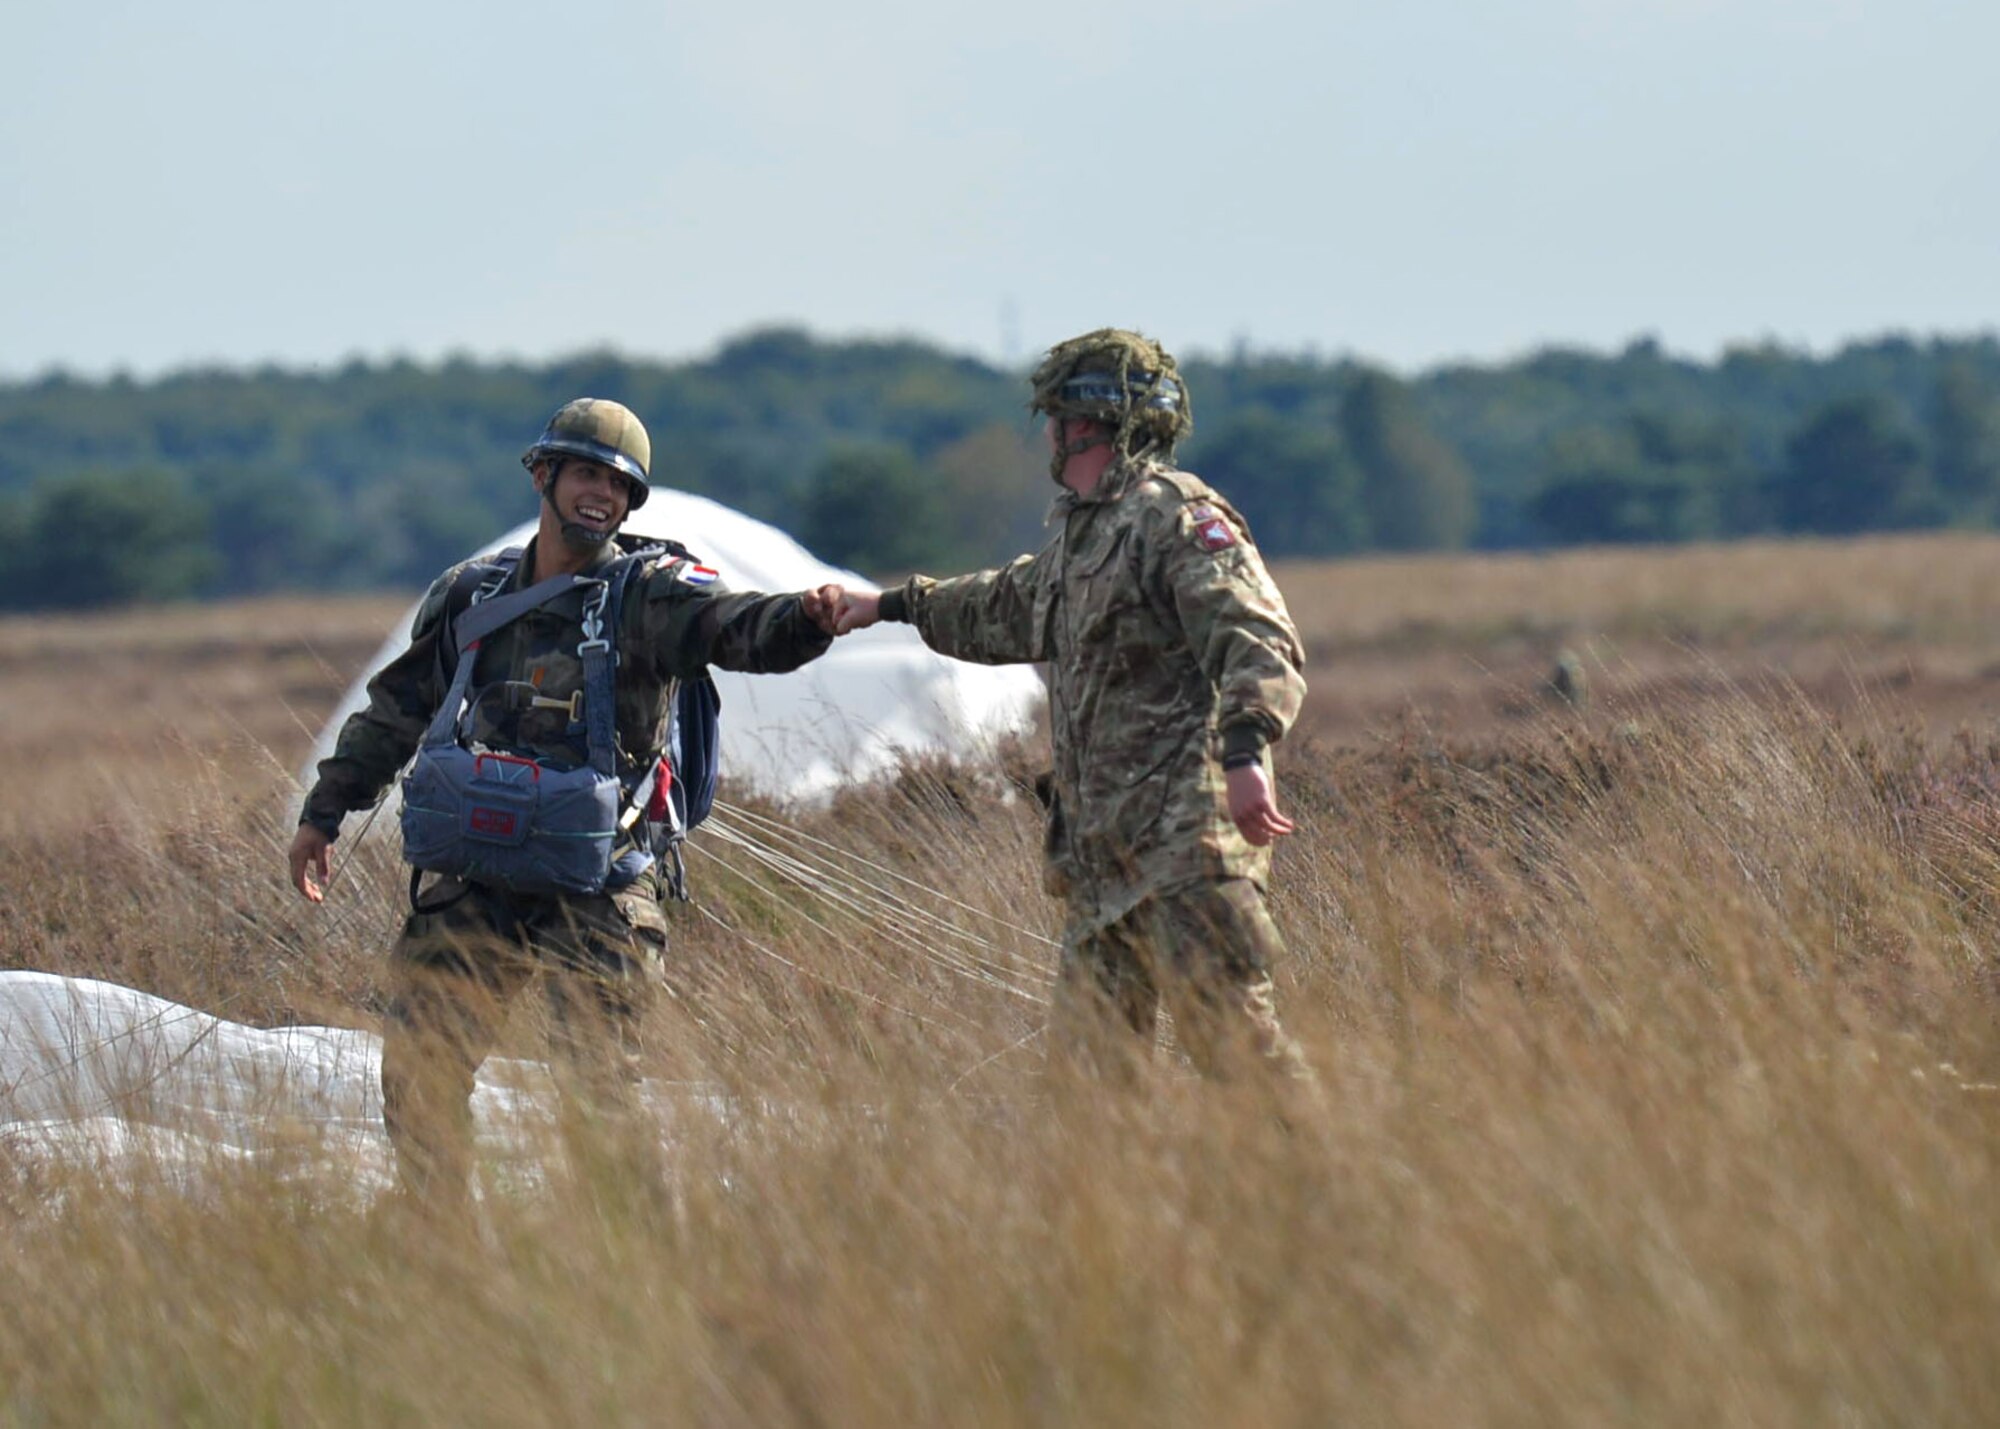 French and British paratroopers congratulate each other after successfully landing on the drop zone during exercise Falcon Leap Sept. 15, 2017, at the Houtdorperveld Drop Zone, Netherlands. Approximately 750 paratroopers from eight different countries participated in exercise Falcon Leap and the commemoration of Operation Market Garden. (U.S. Air Force photo by Airman 1st Class Codie Collins)